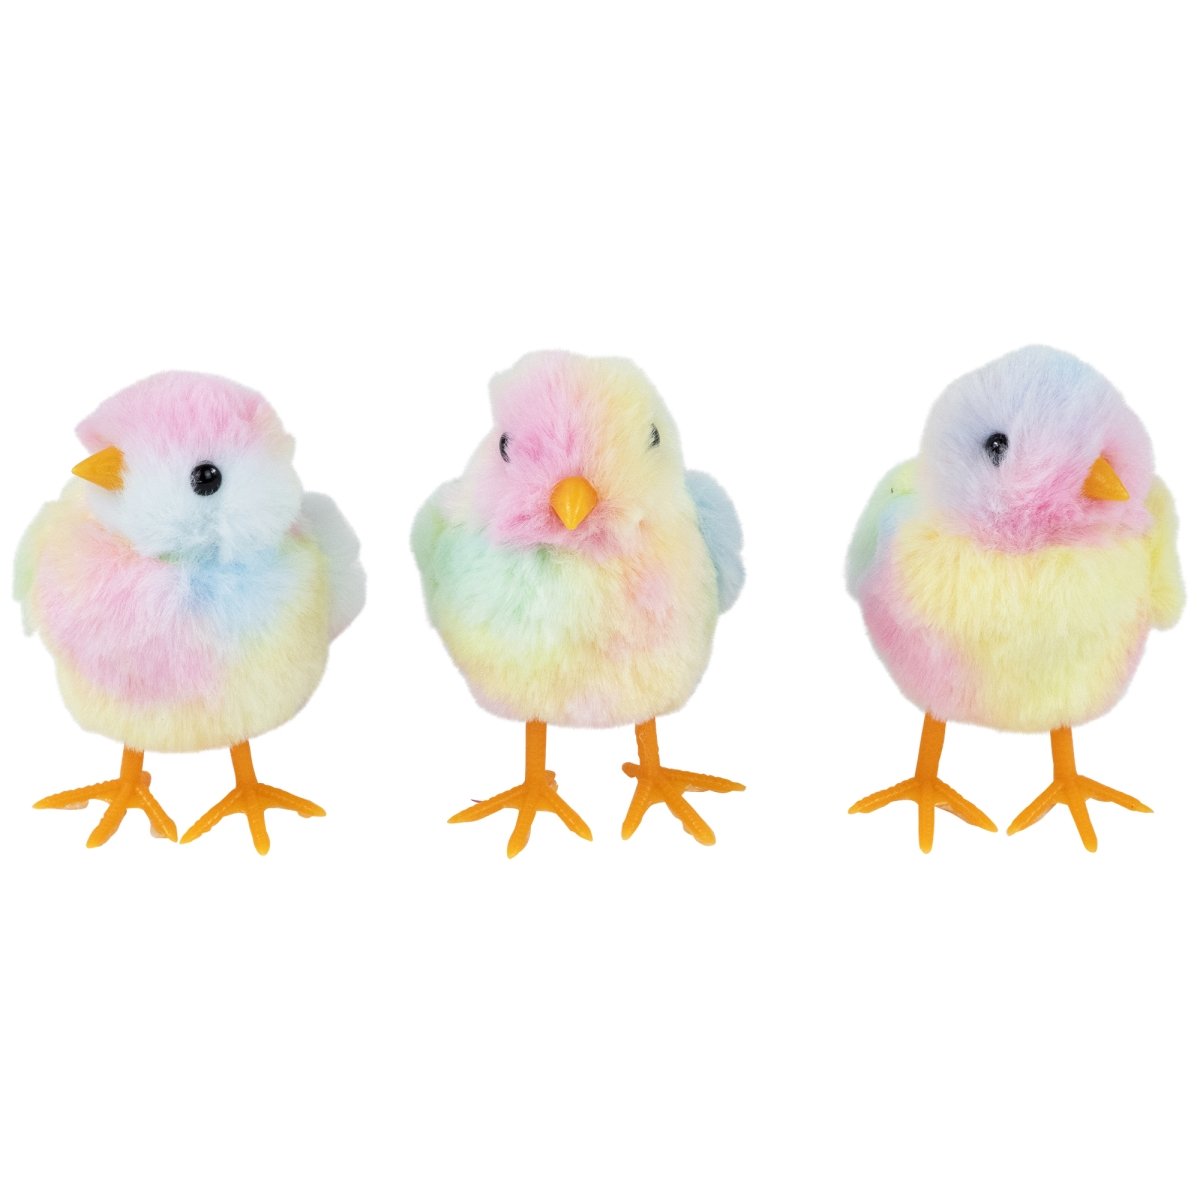 Picture of Northlight 35737335 4.5 x 2.75 x 3 in. Plush Tie Dye Easter Chick Figurine - Set of 3